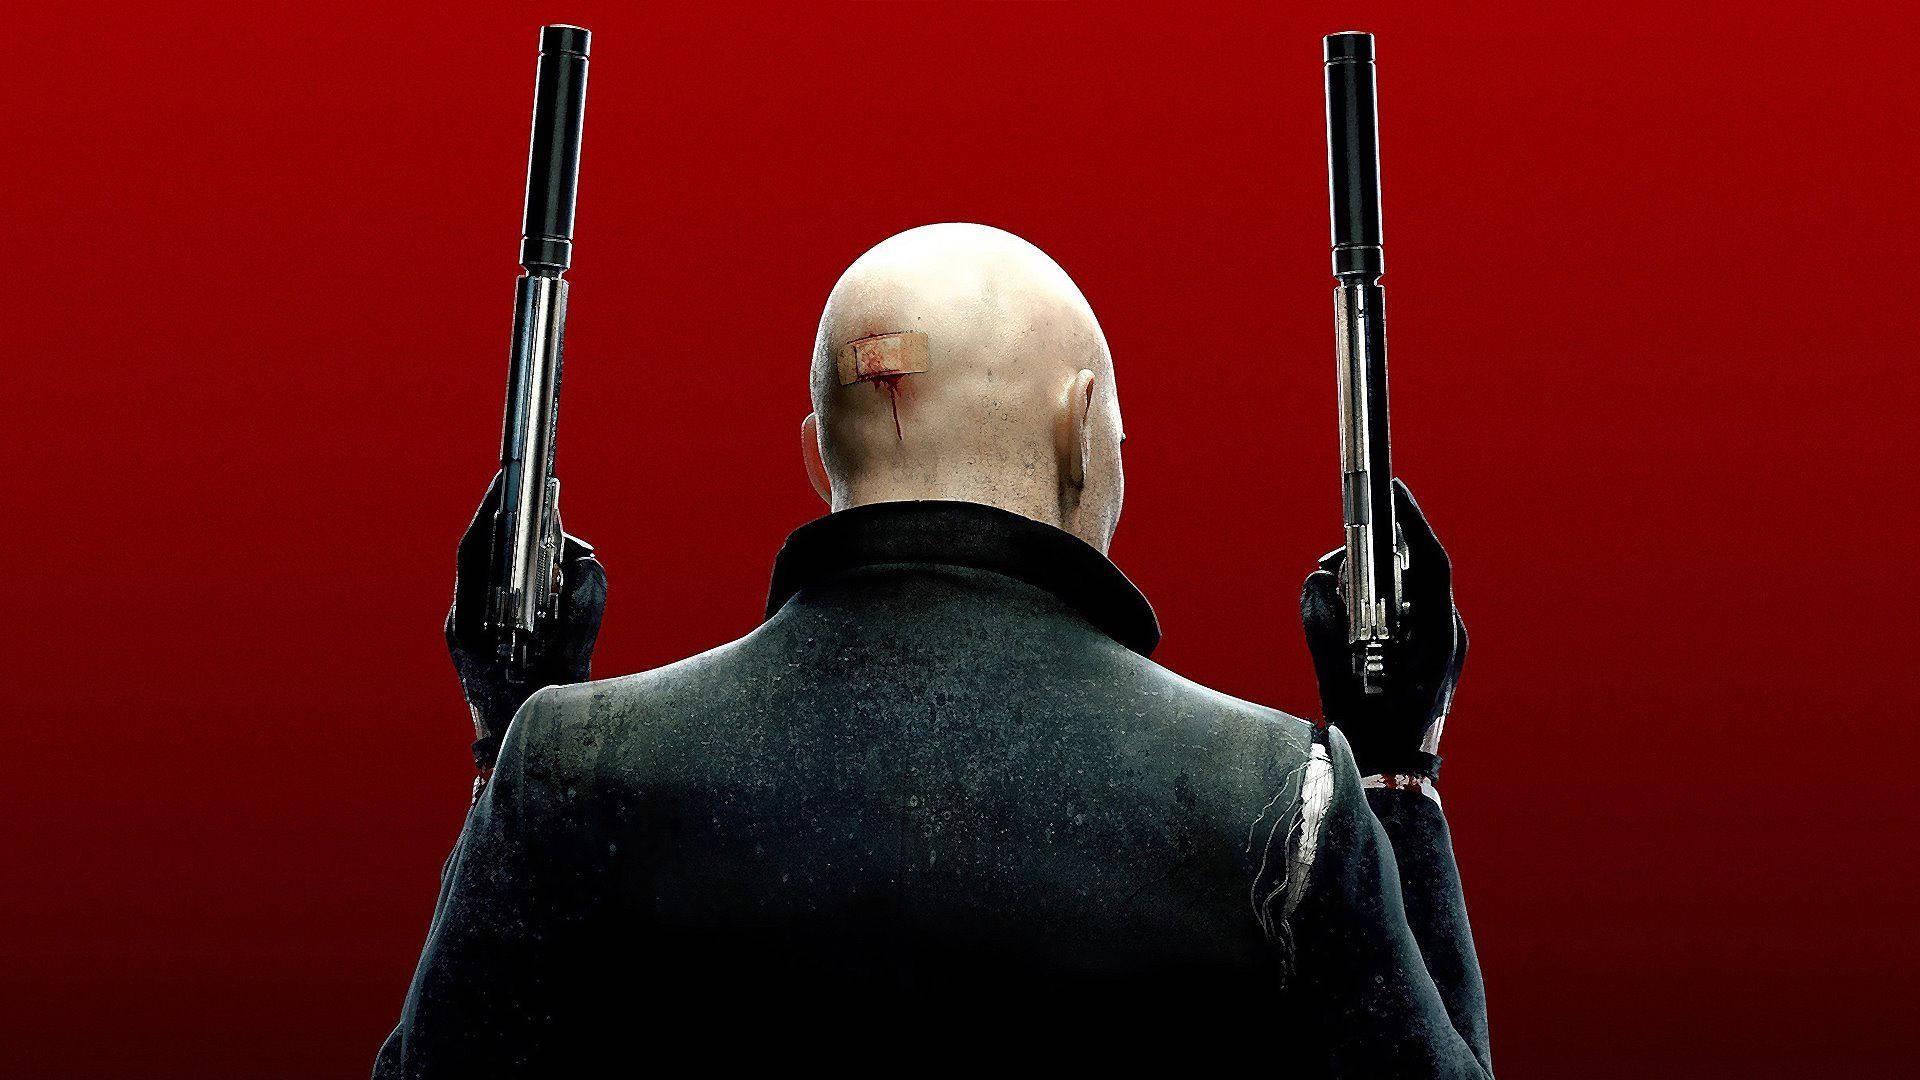 Hitman Absolution Wounded Agent 47 Wallpaper